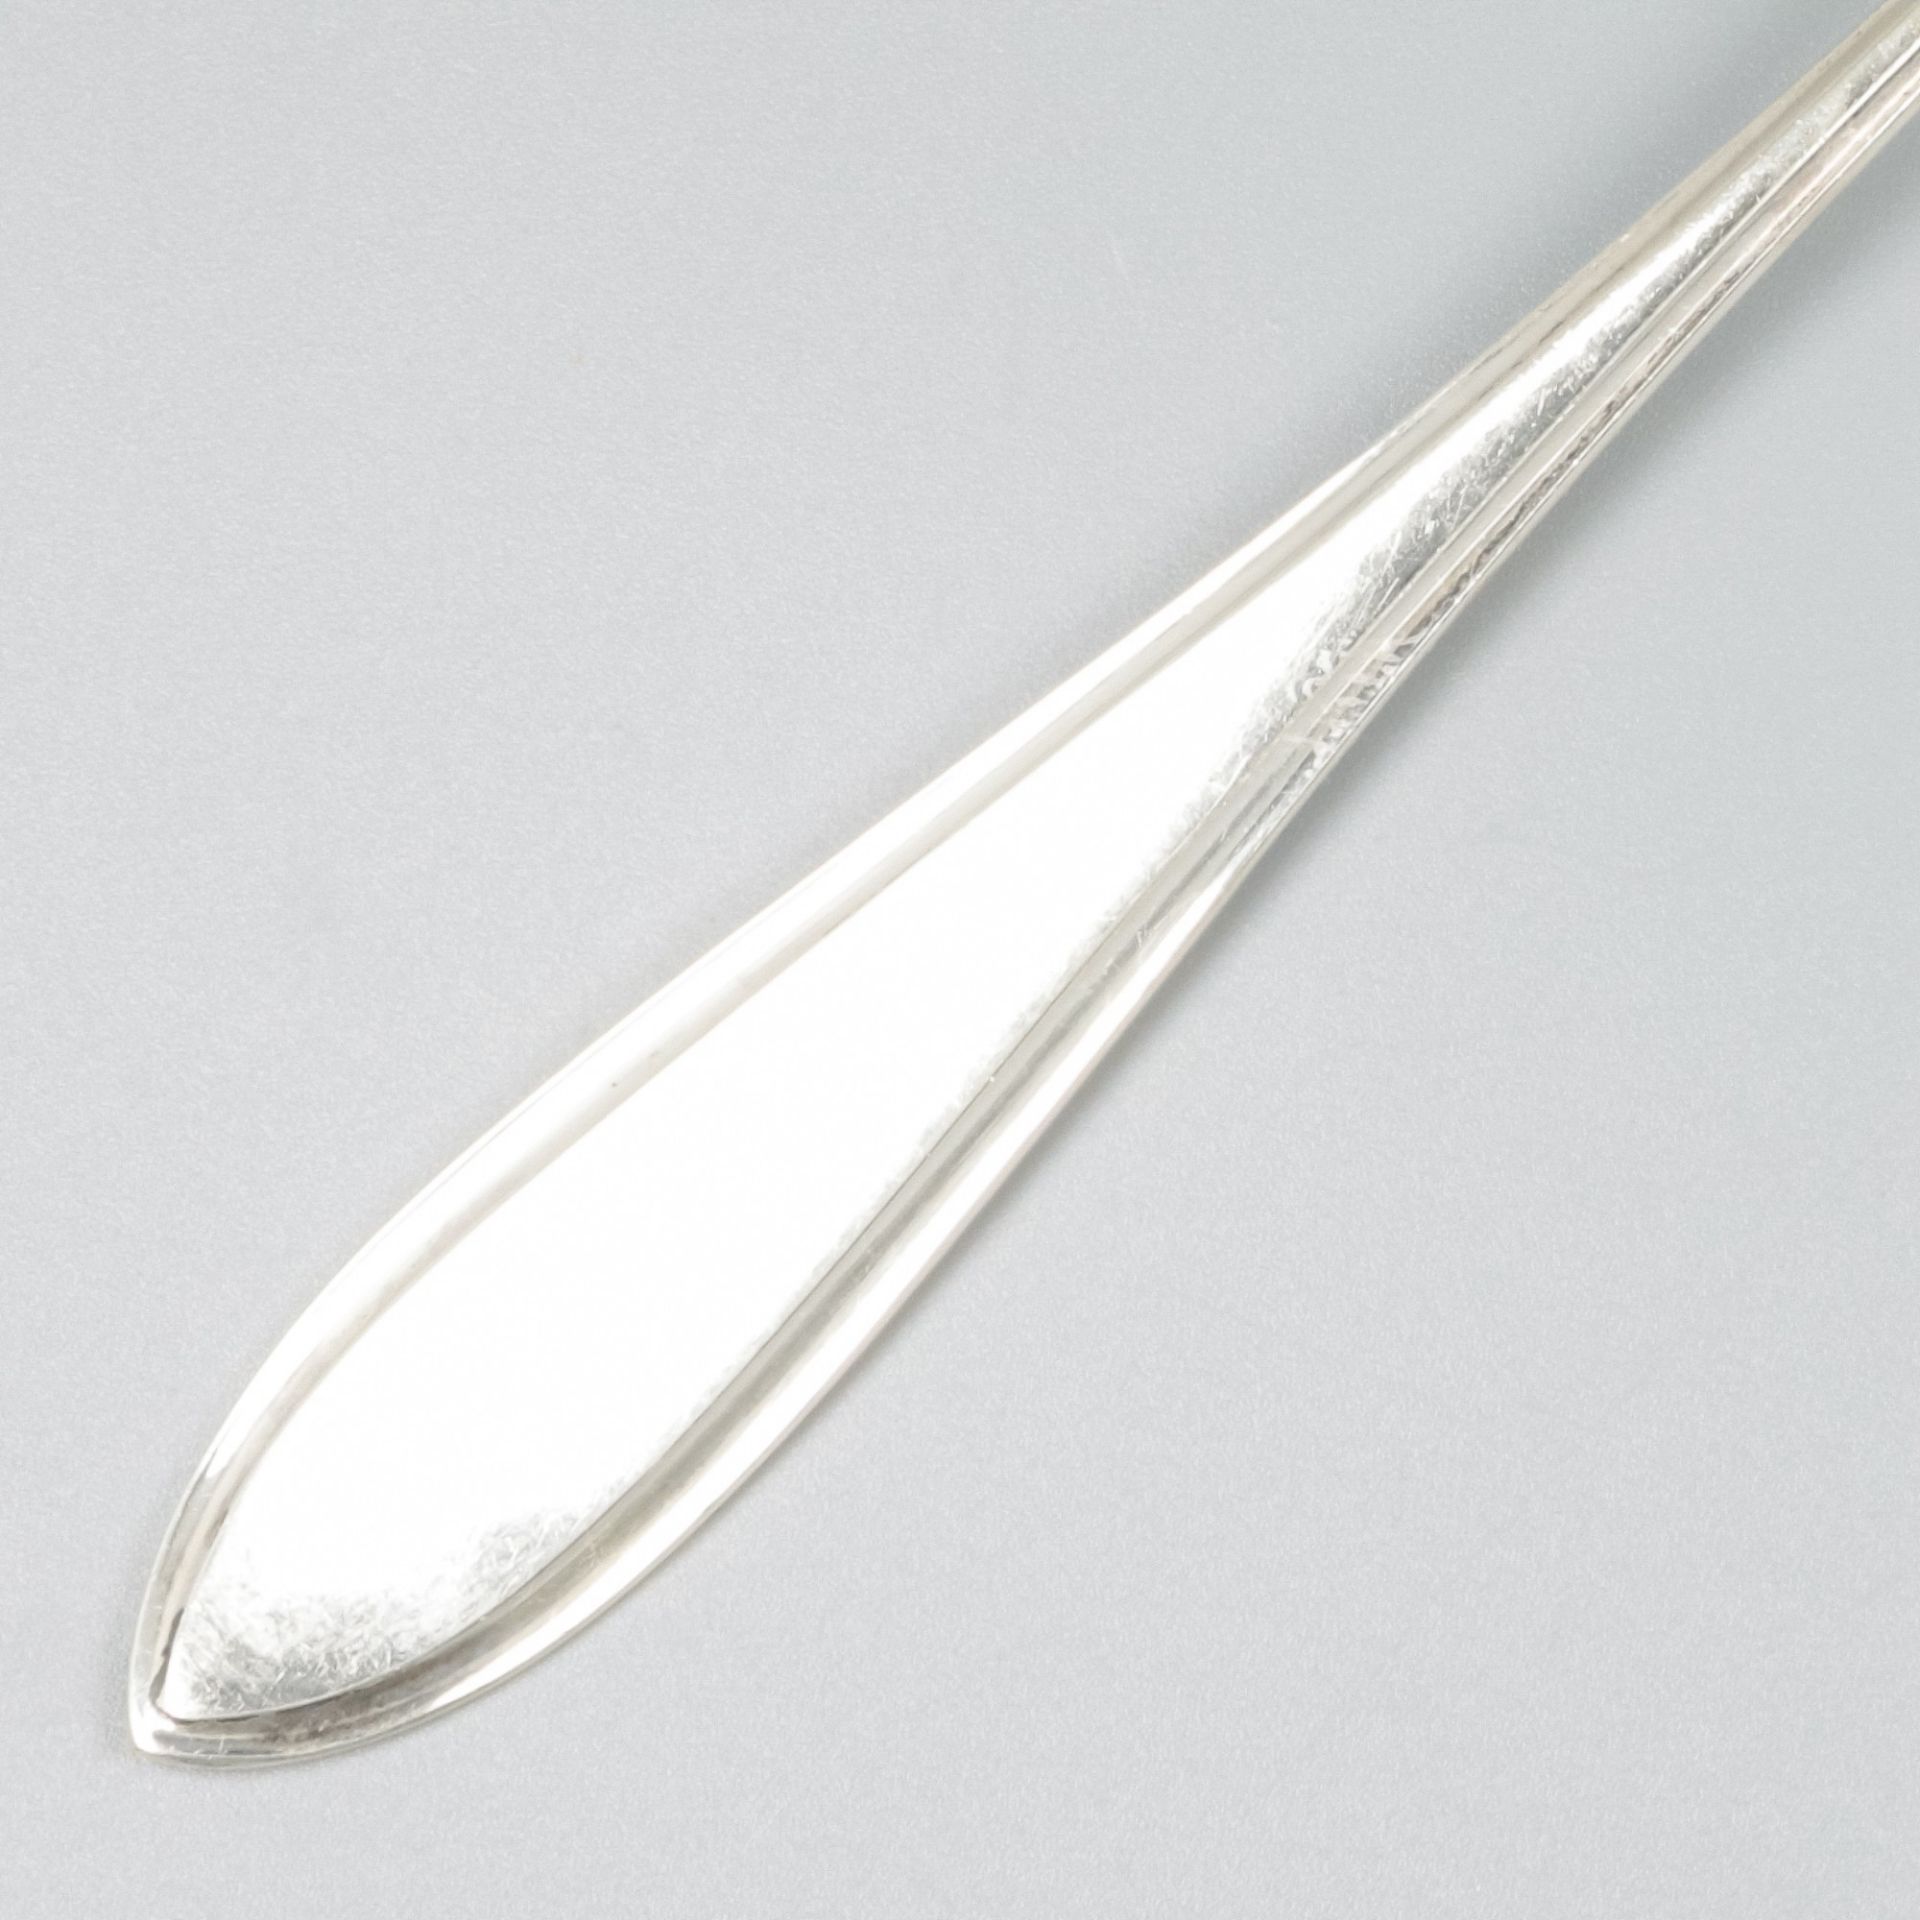 Silver strawberry spoon, model 1064 designed by Christa Ehrlich. - Image 5 of 8